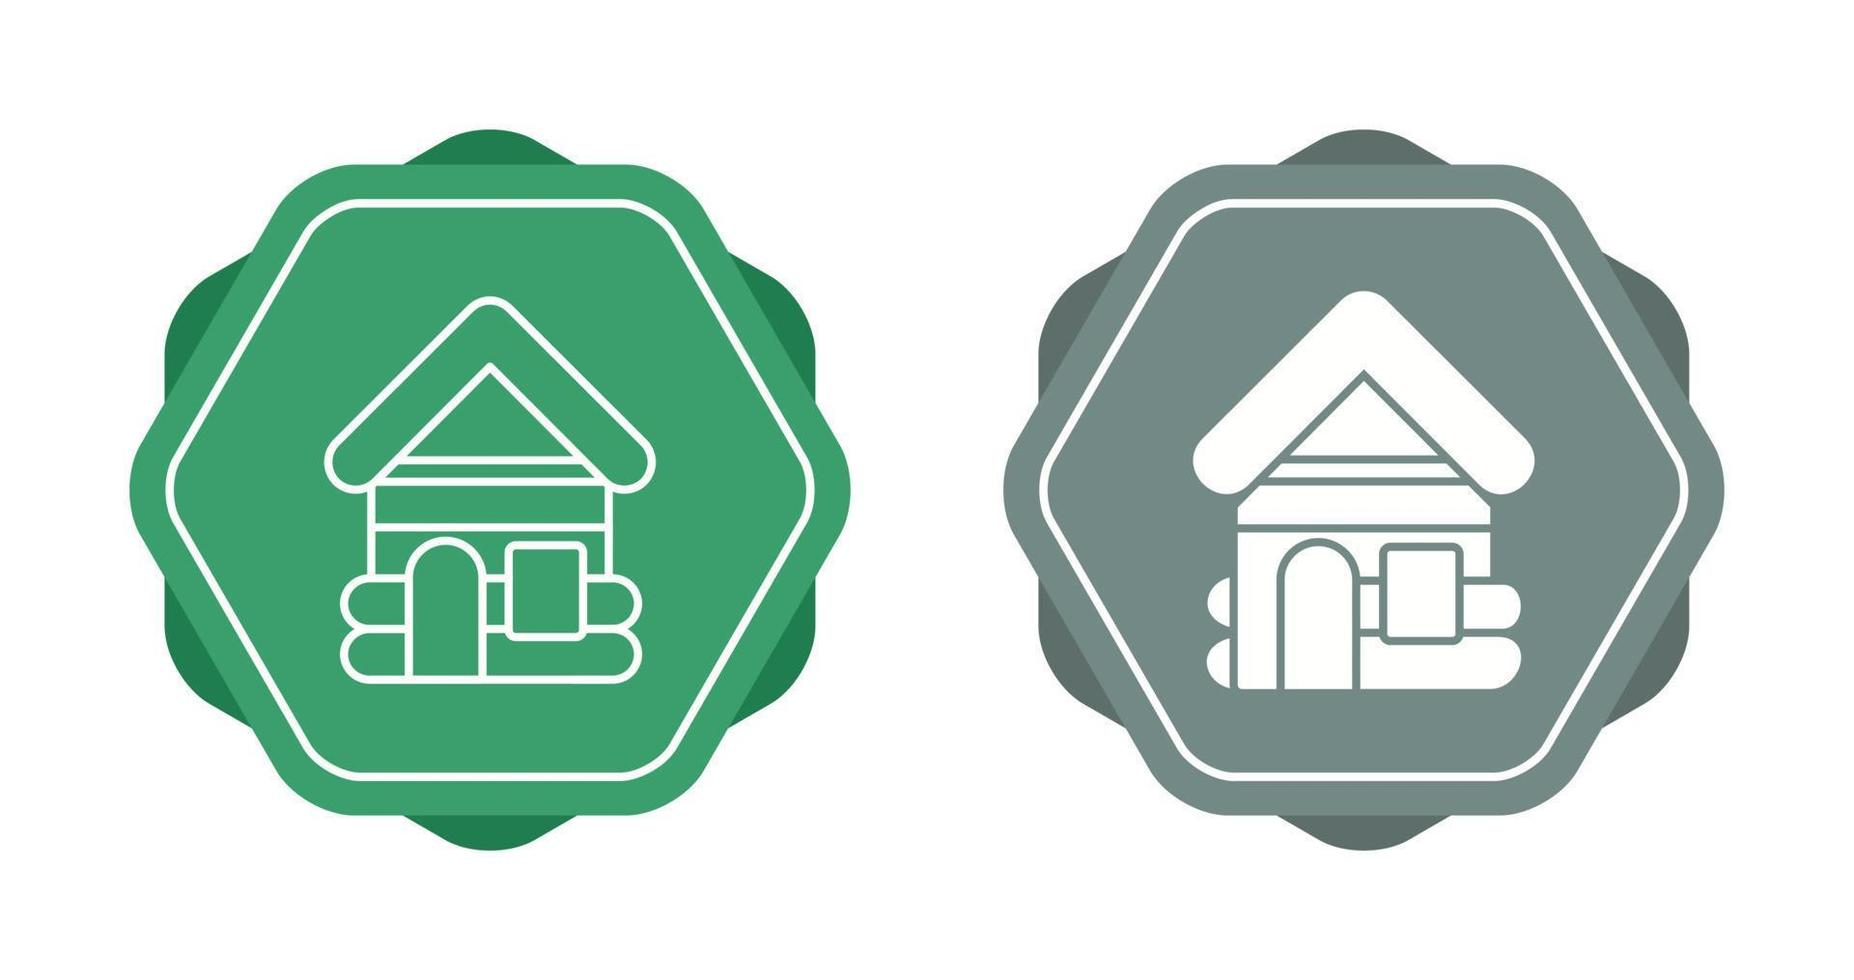 Cottage Vector Icon